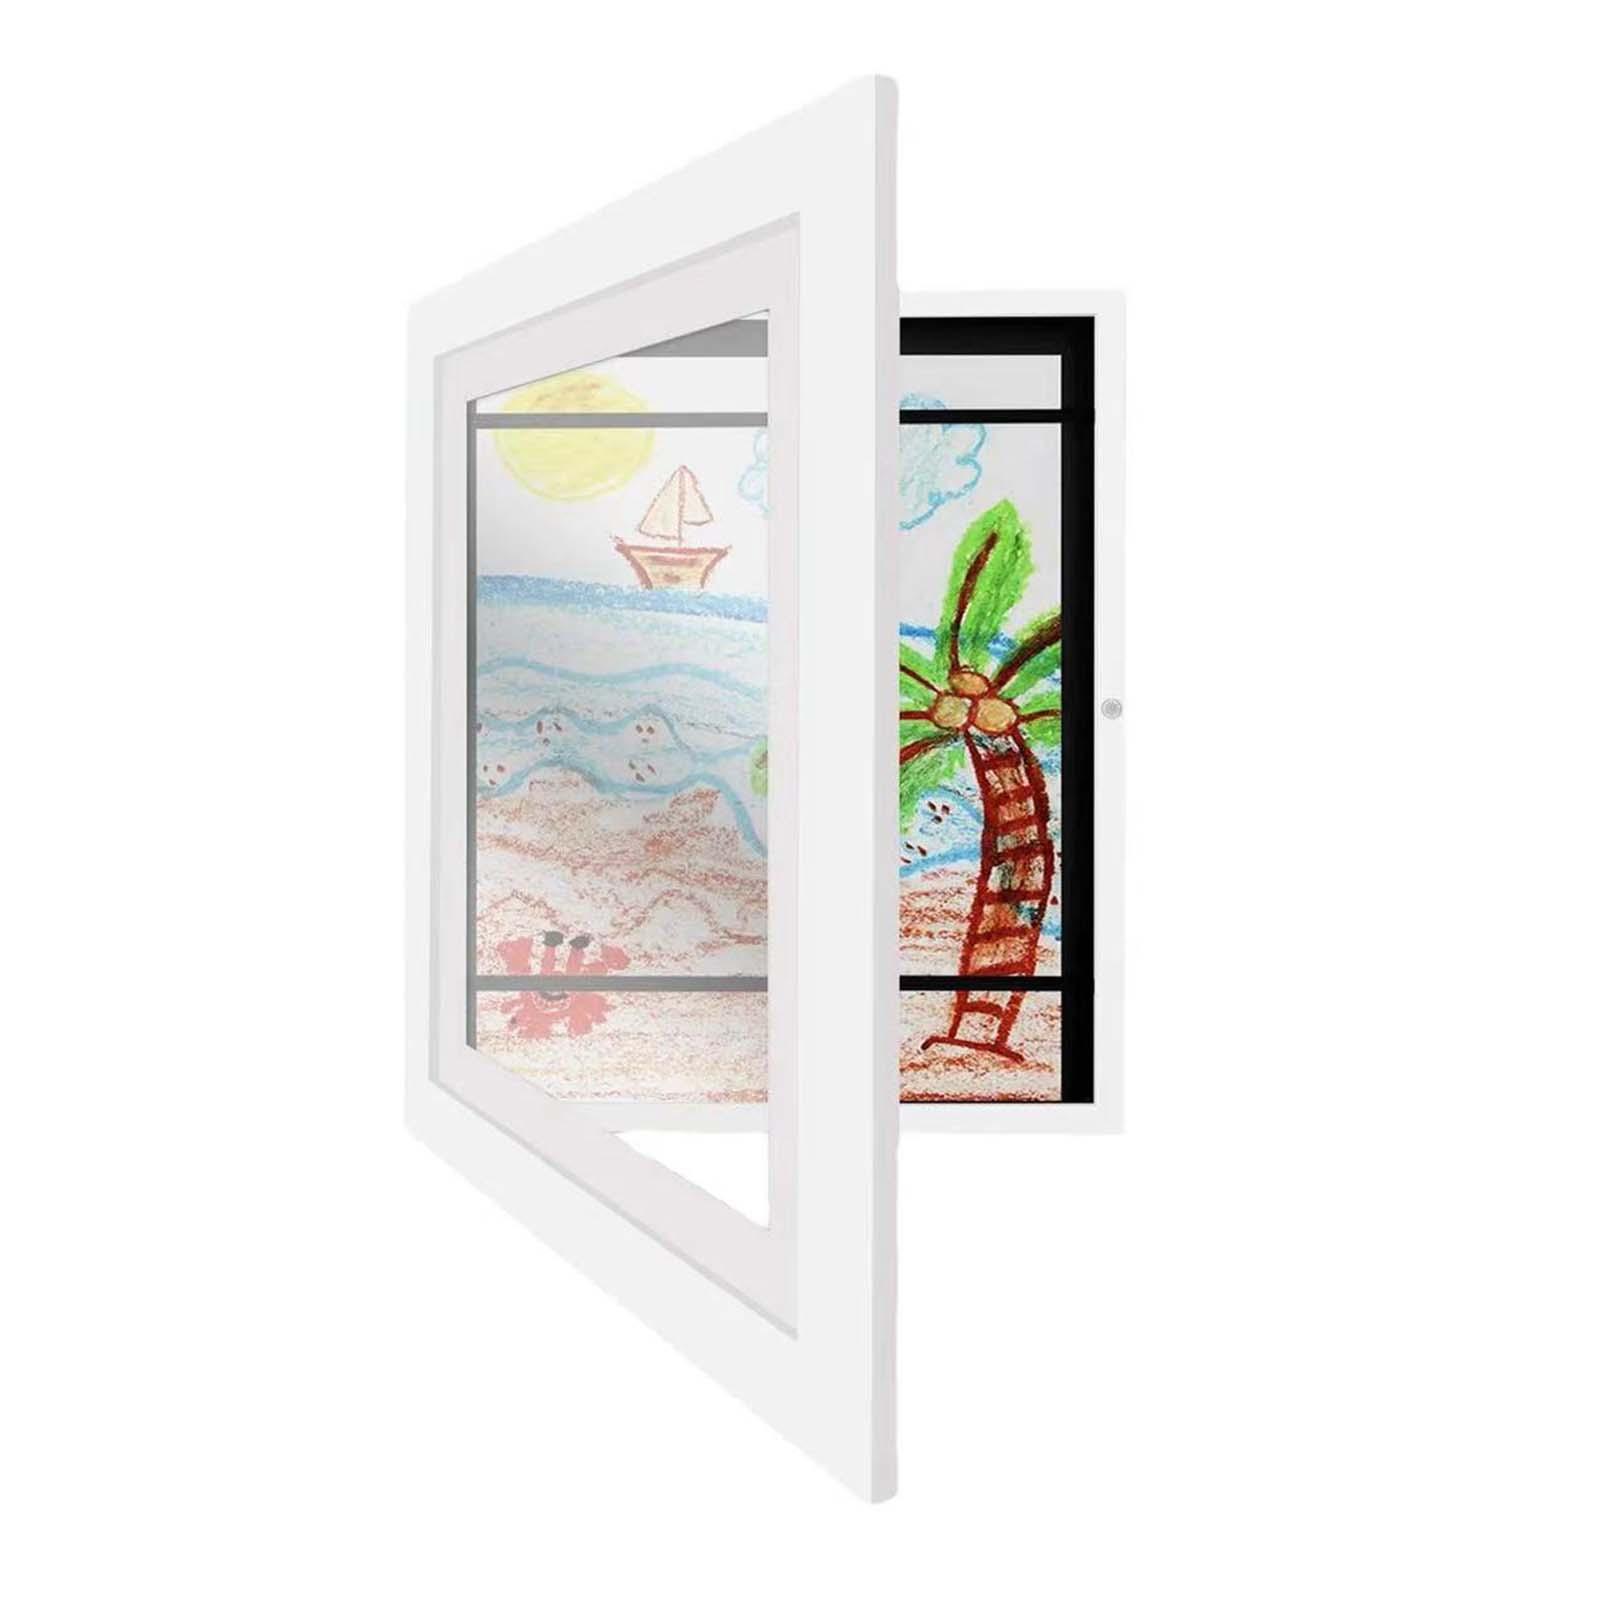 Kids Artwork Frames Horizontal and Vertical Formats for Pictures Drawings White